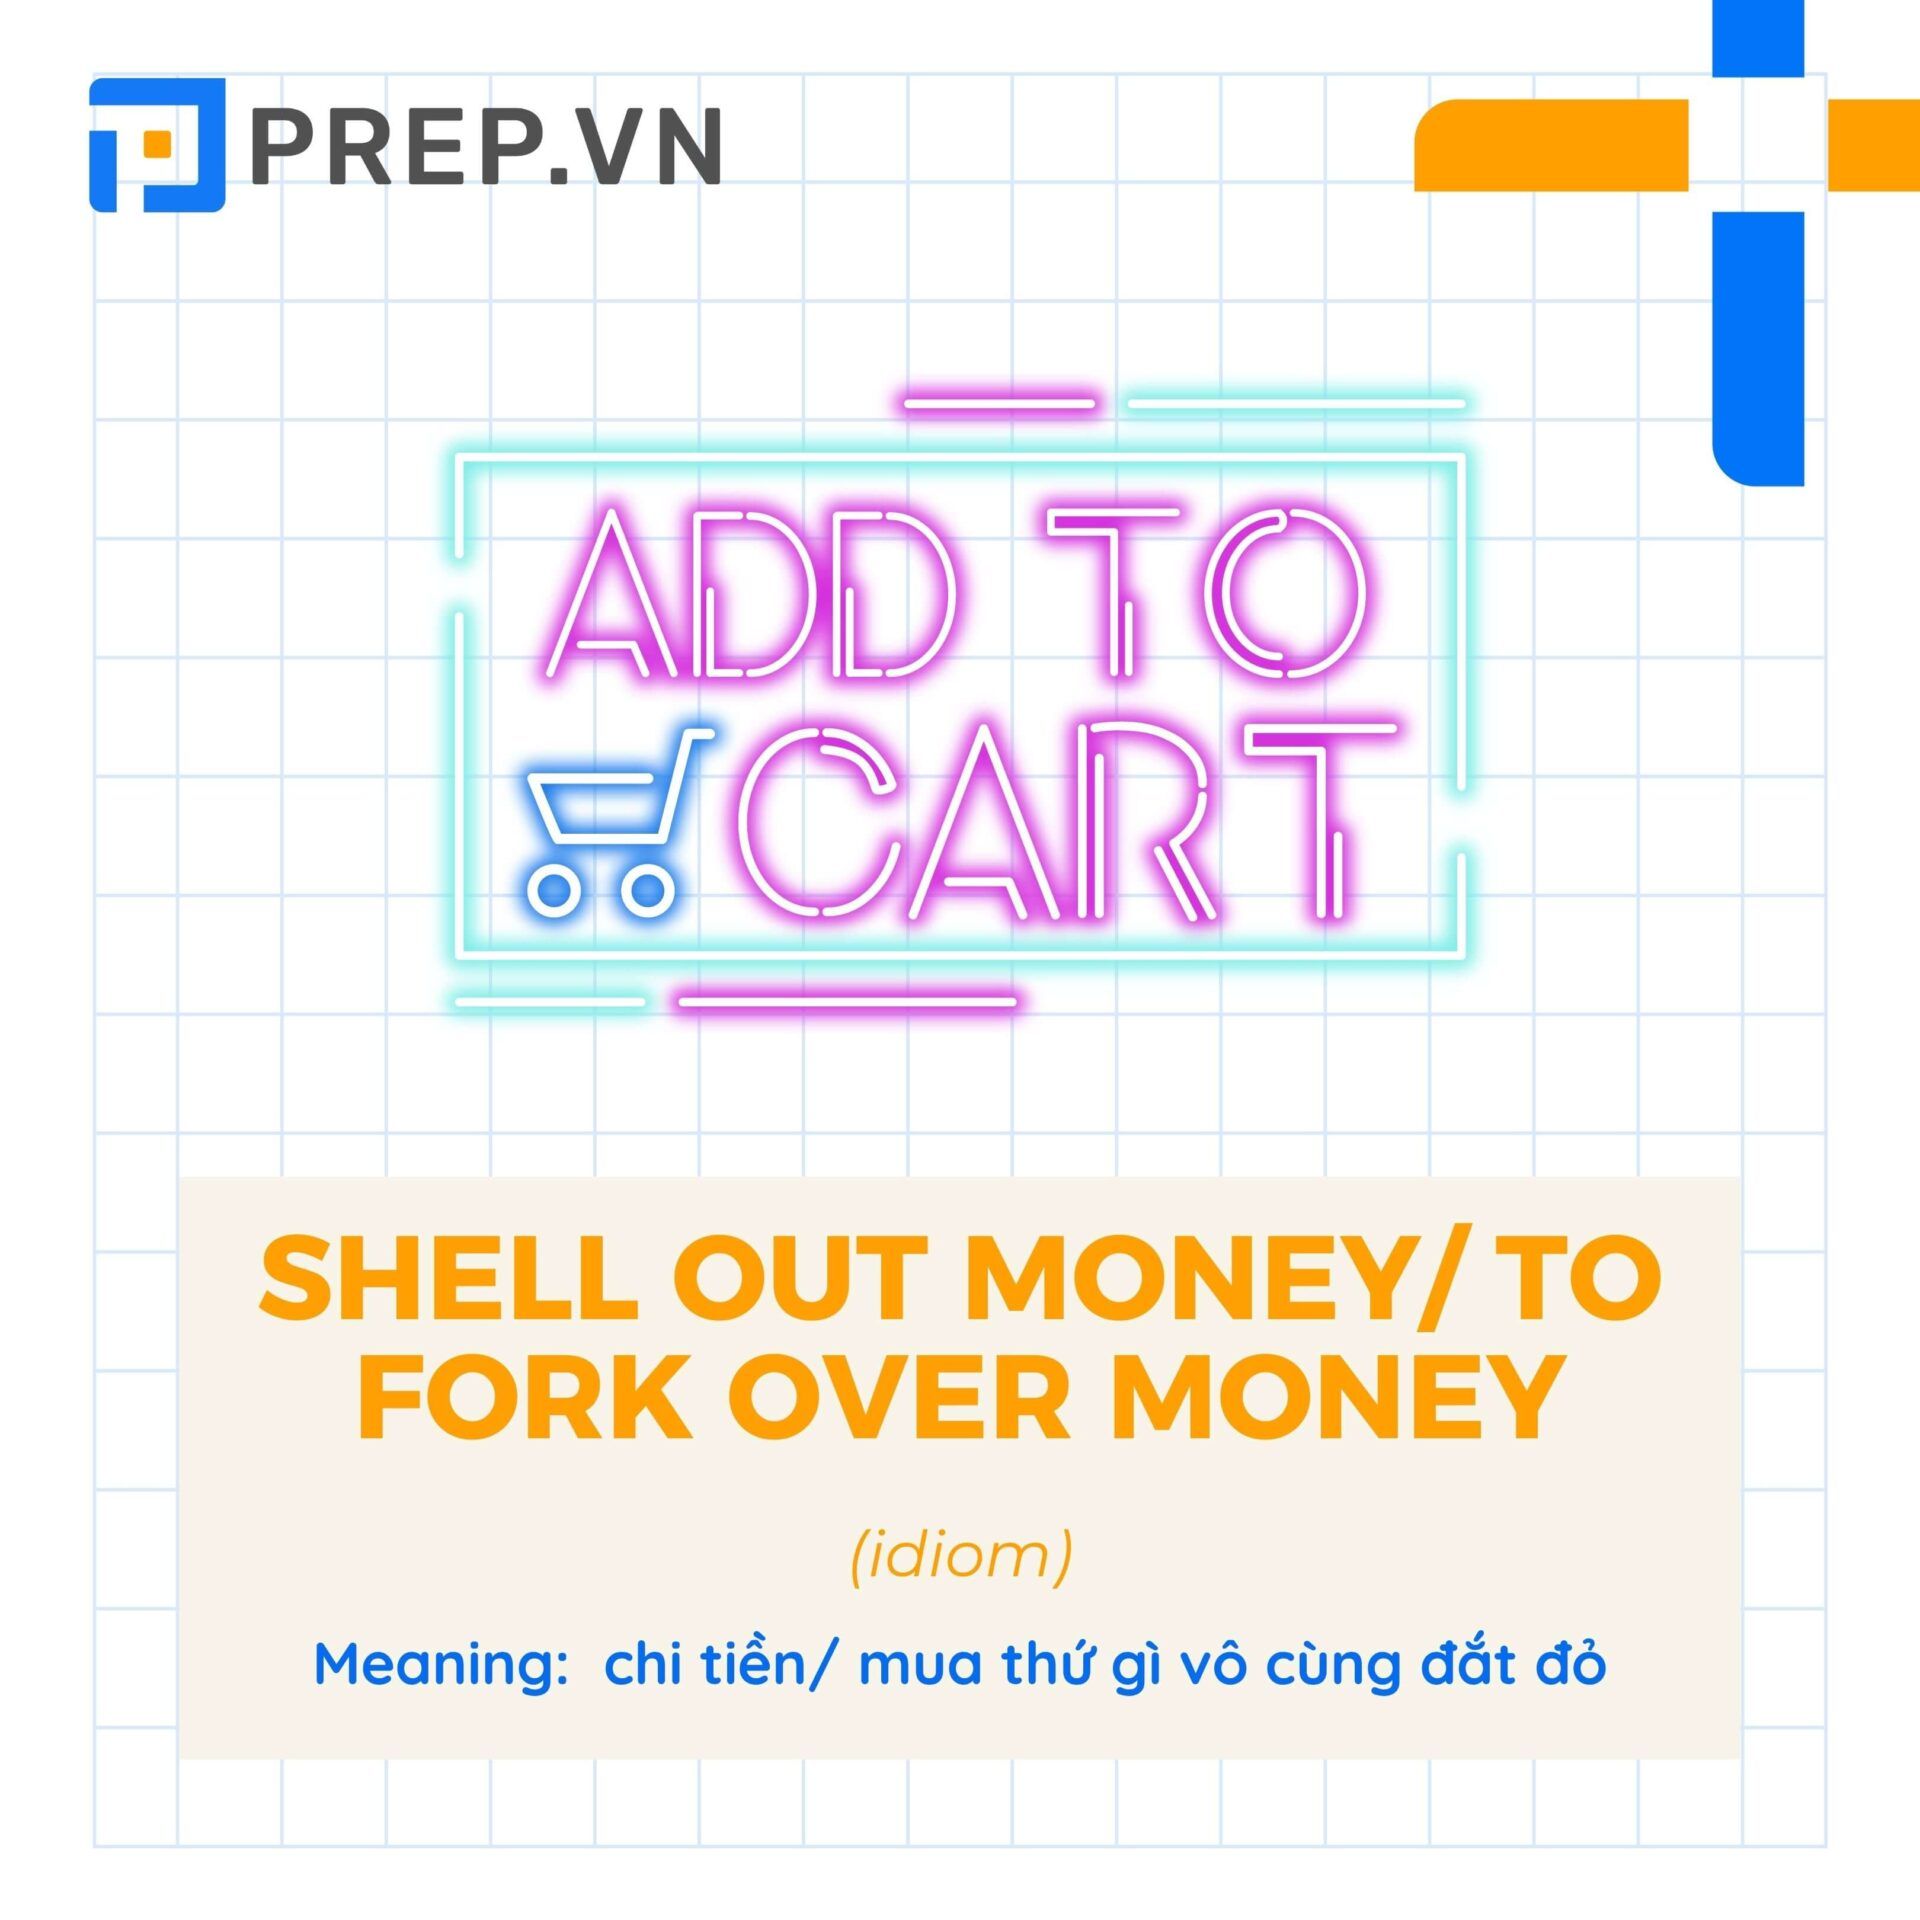 Shell out money/ to fork over money